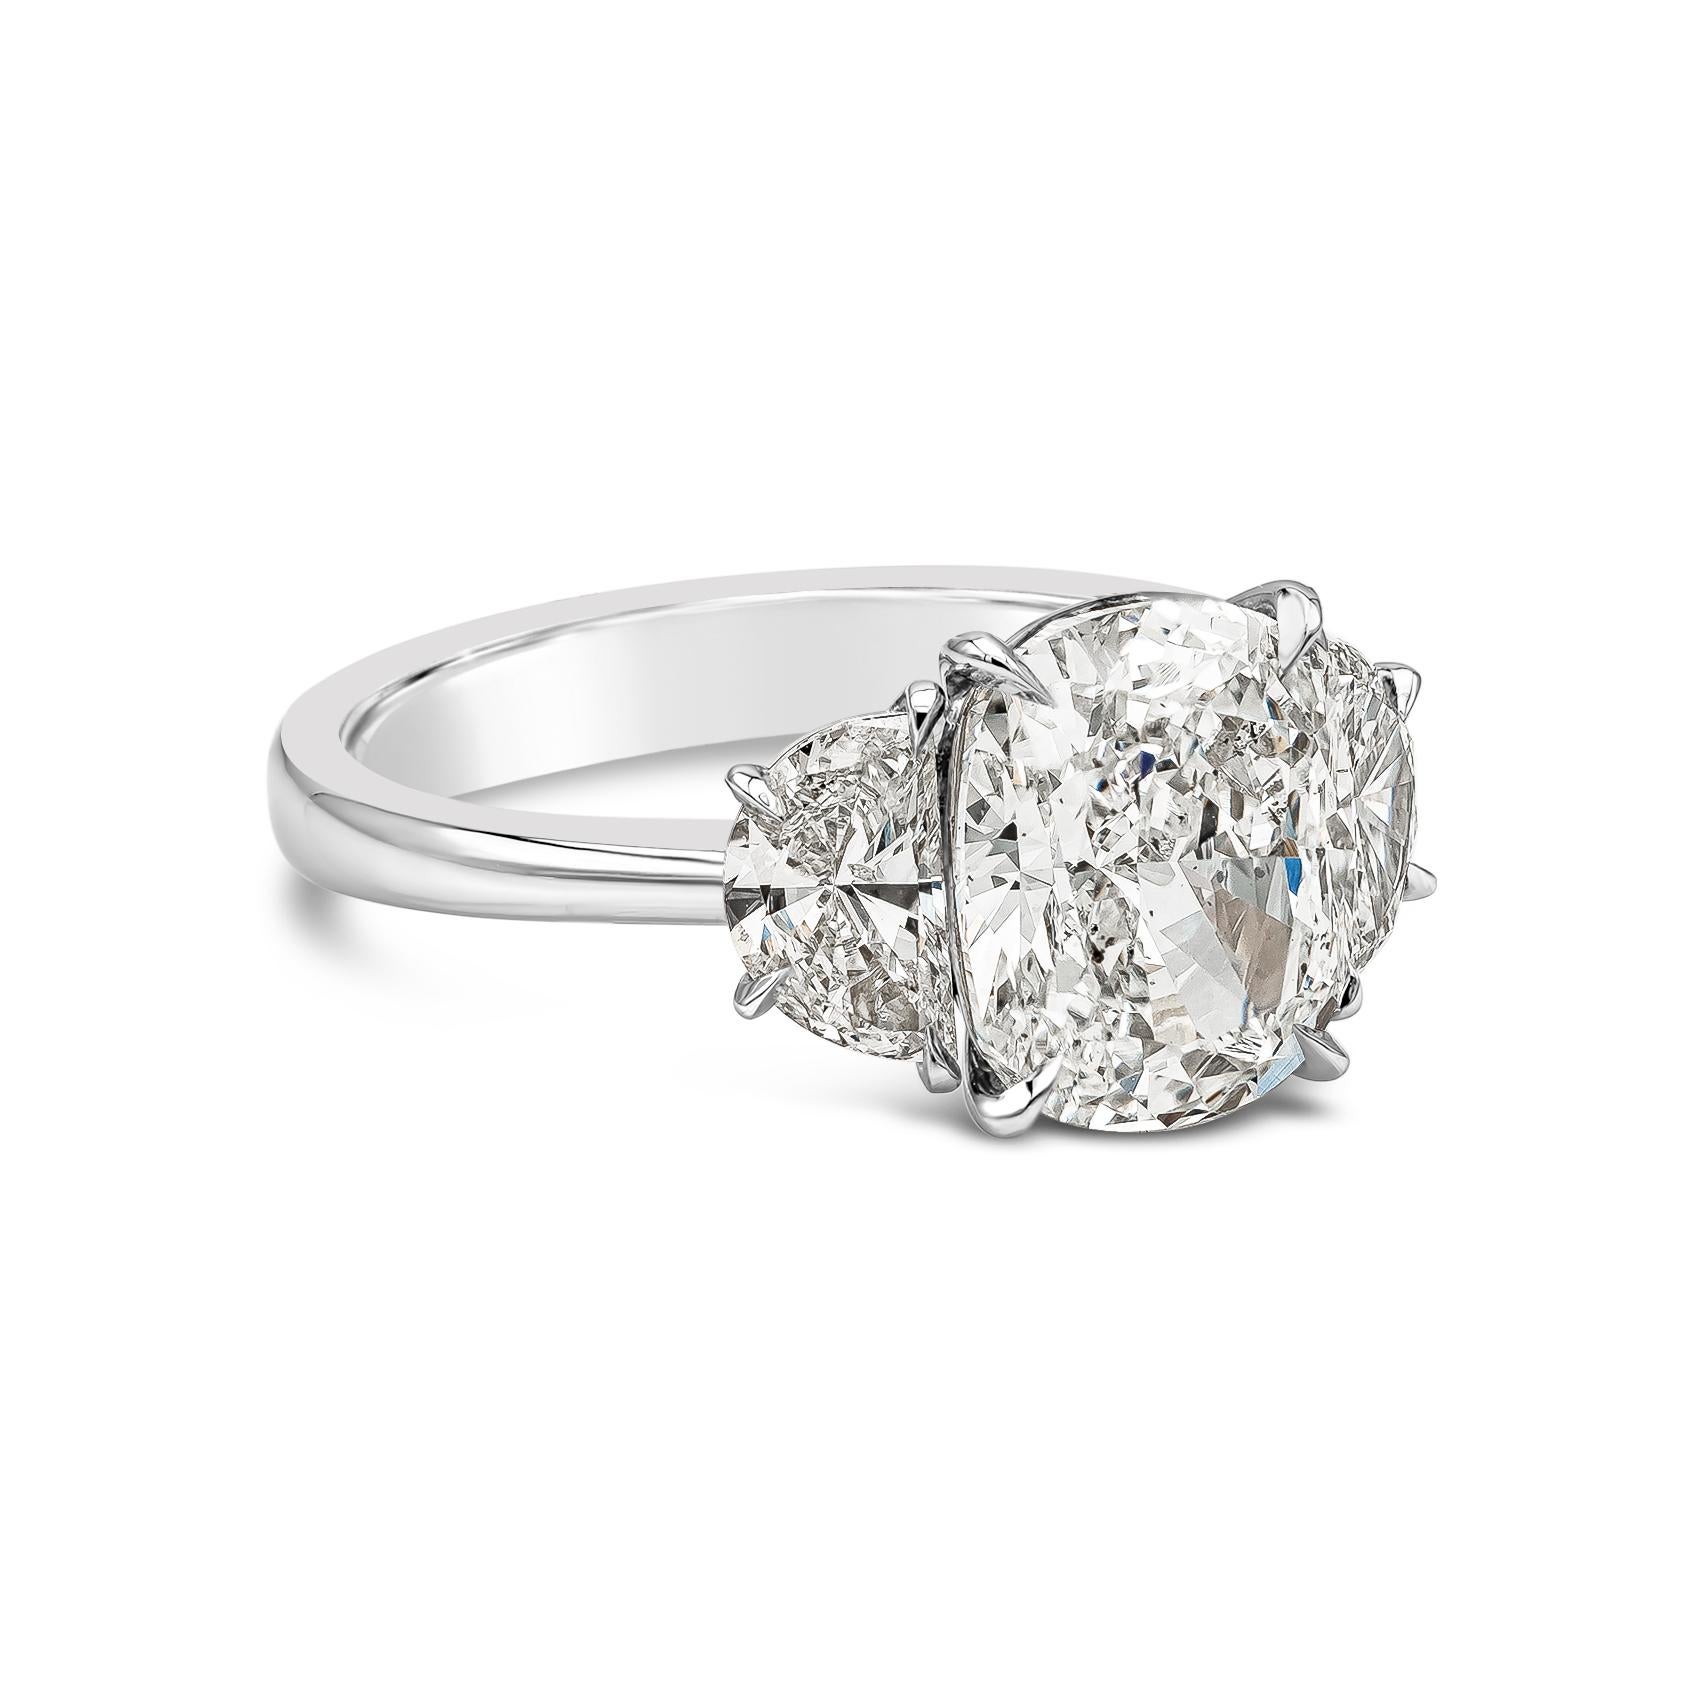 A beautiful engagement ring, showcasing a 3.11 carats brilliant cushion cut diamond certified by GIA as H color and SI1 clarity, accented by two brilliant half moon diamonds weighing 0.90 carats total. Set in a polished platinum mounting. Size 6.75